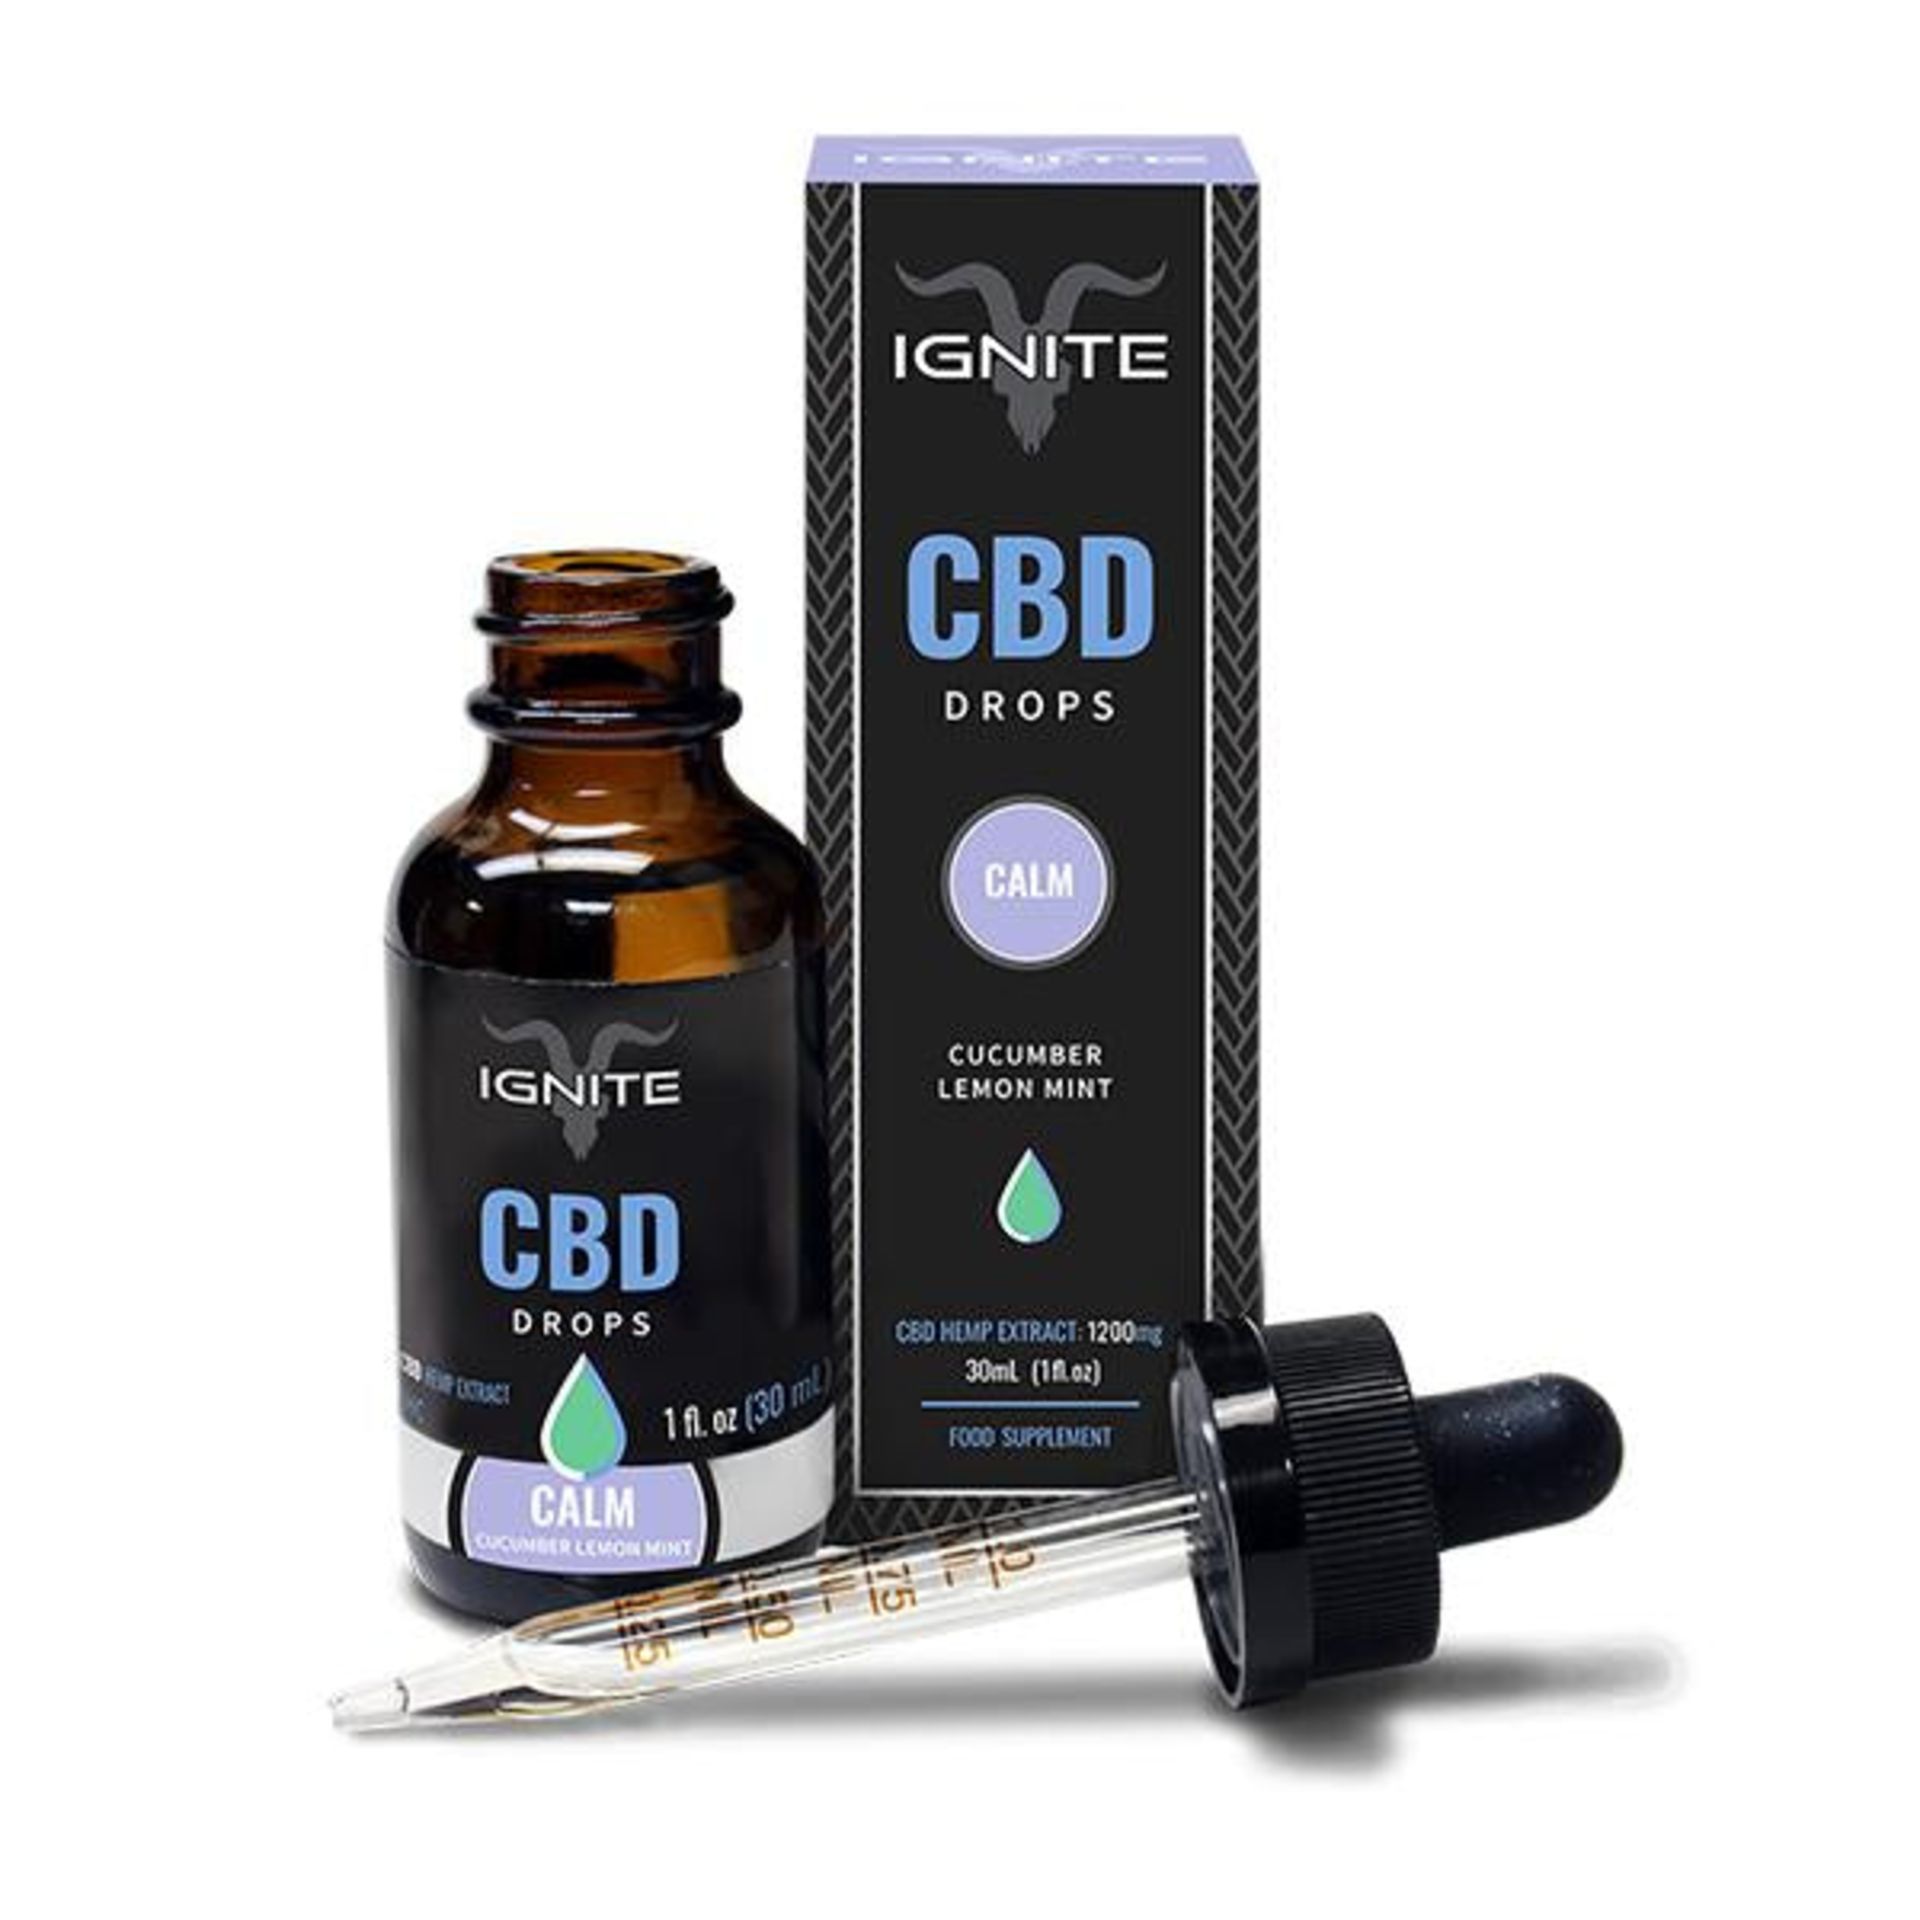 25 NEW BOTTLES OF CBD ORAL DROPS - LAVENDER (CALM) 1200MG - RRP £25+ EACH